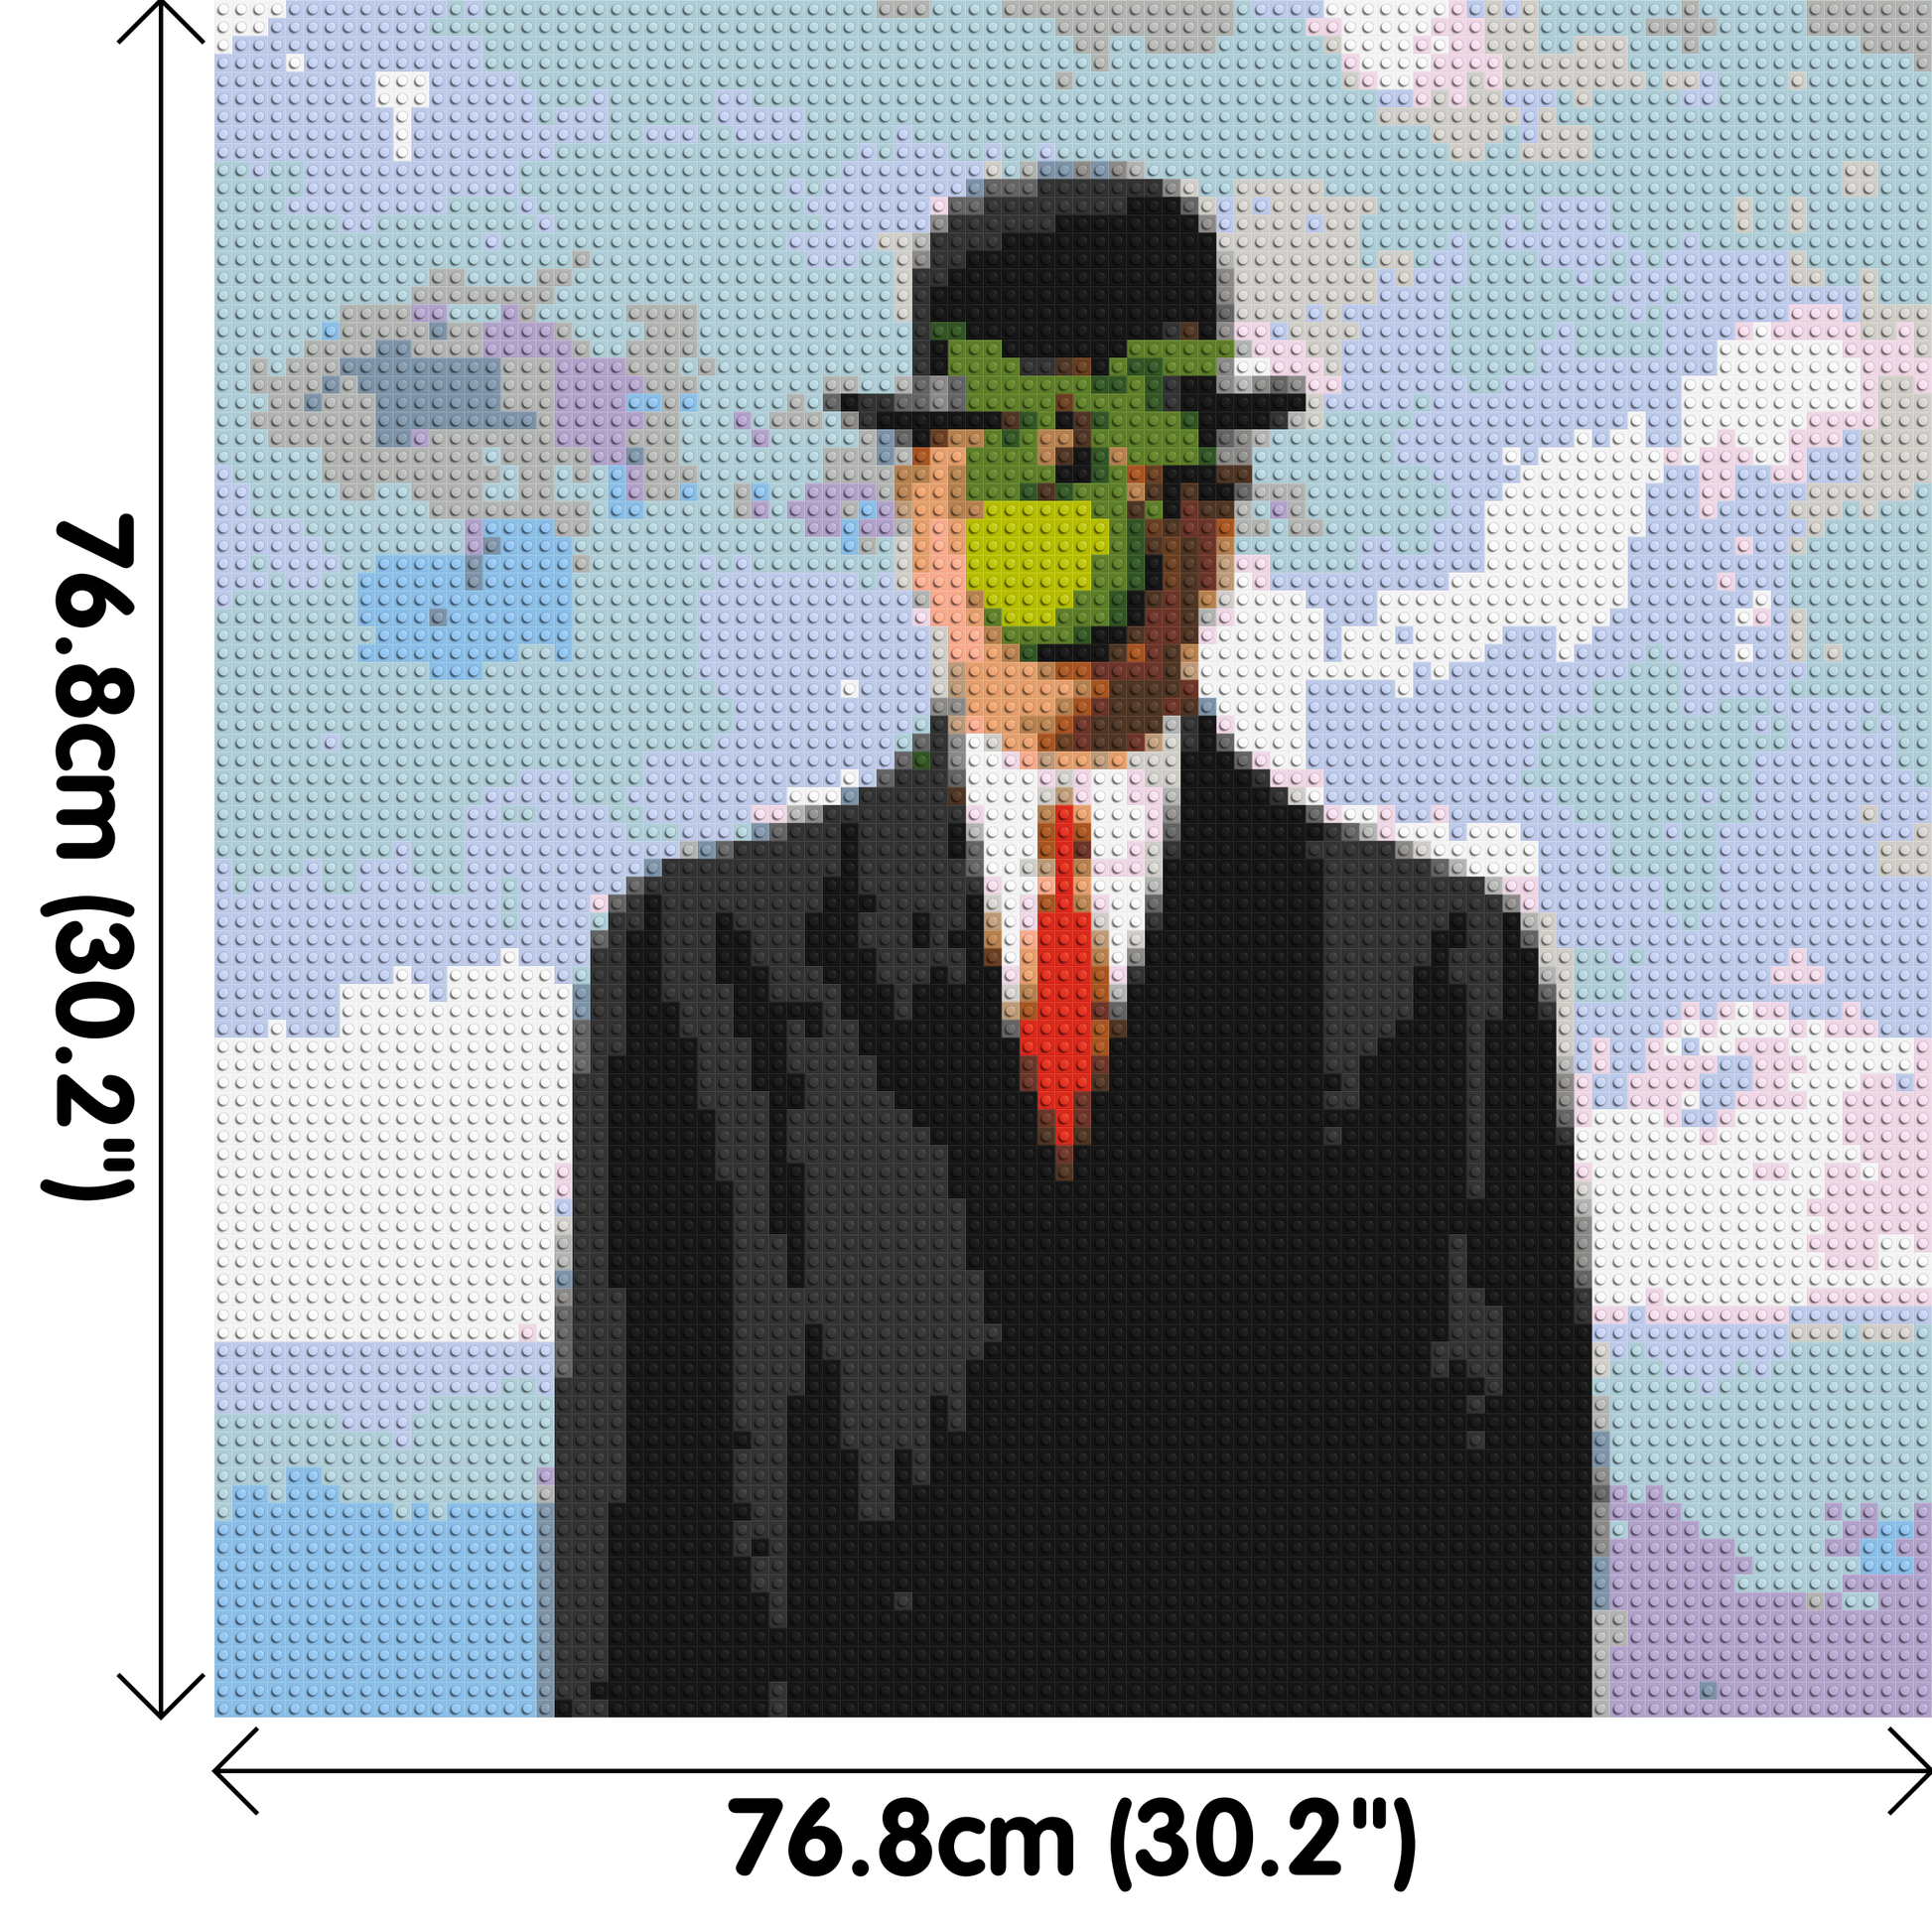 The Son of Man by René Magritte - Brick Art Mosaic Kit 4x4 dimensions